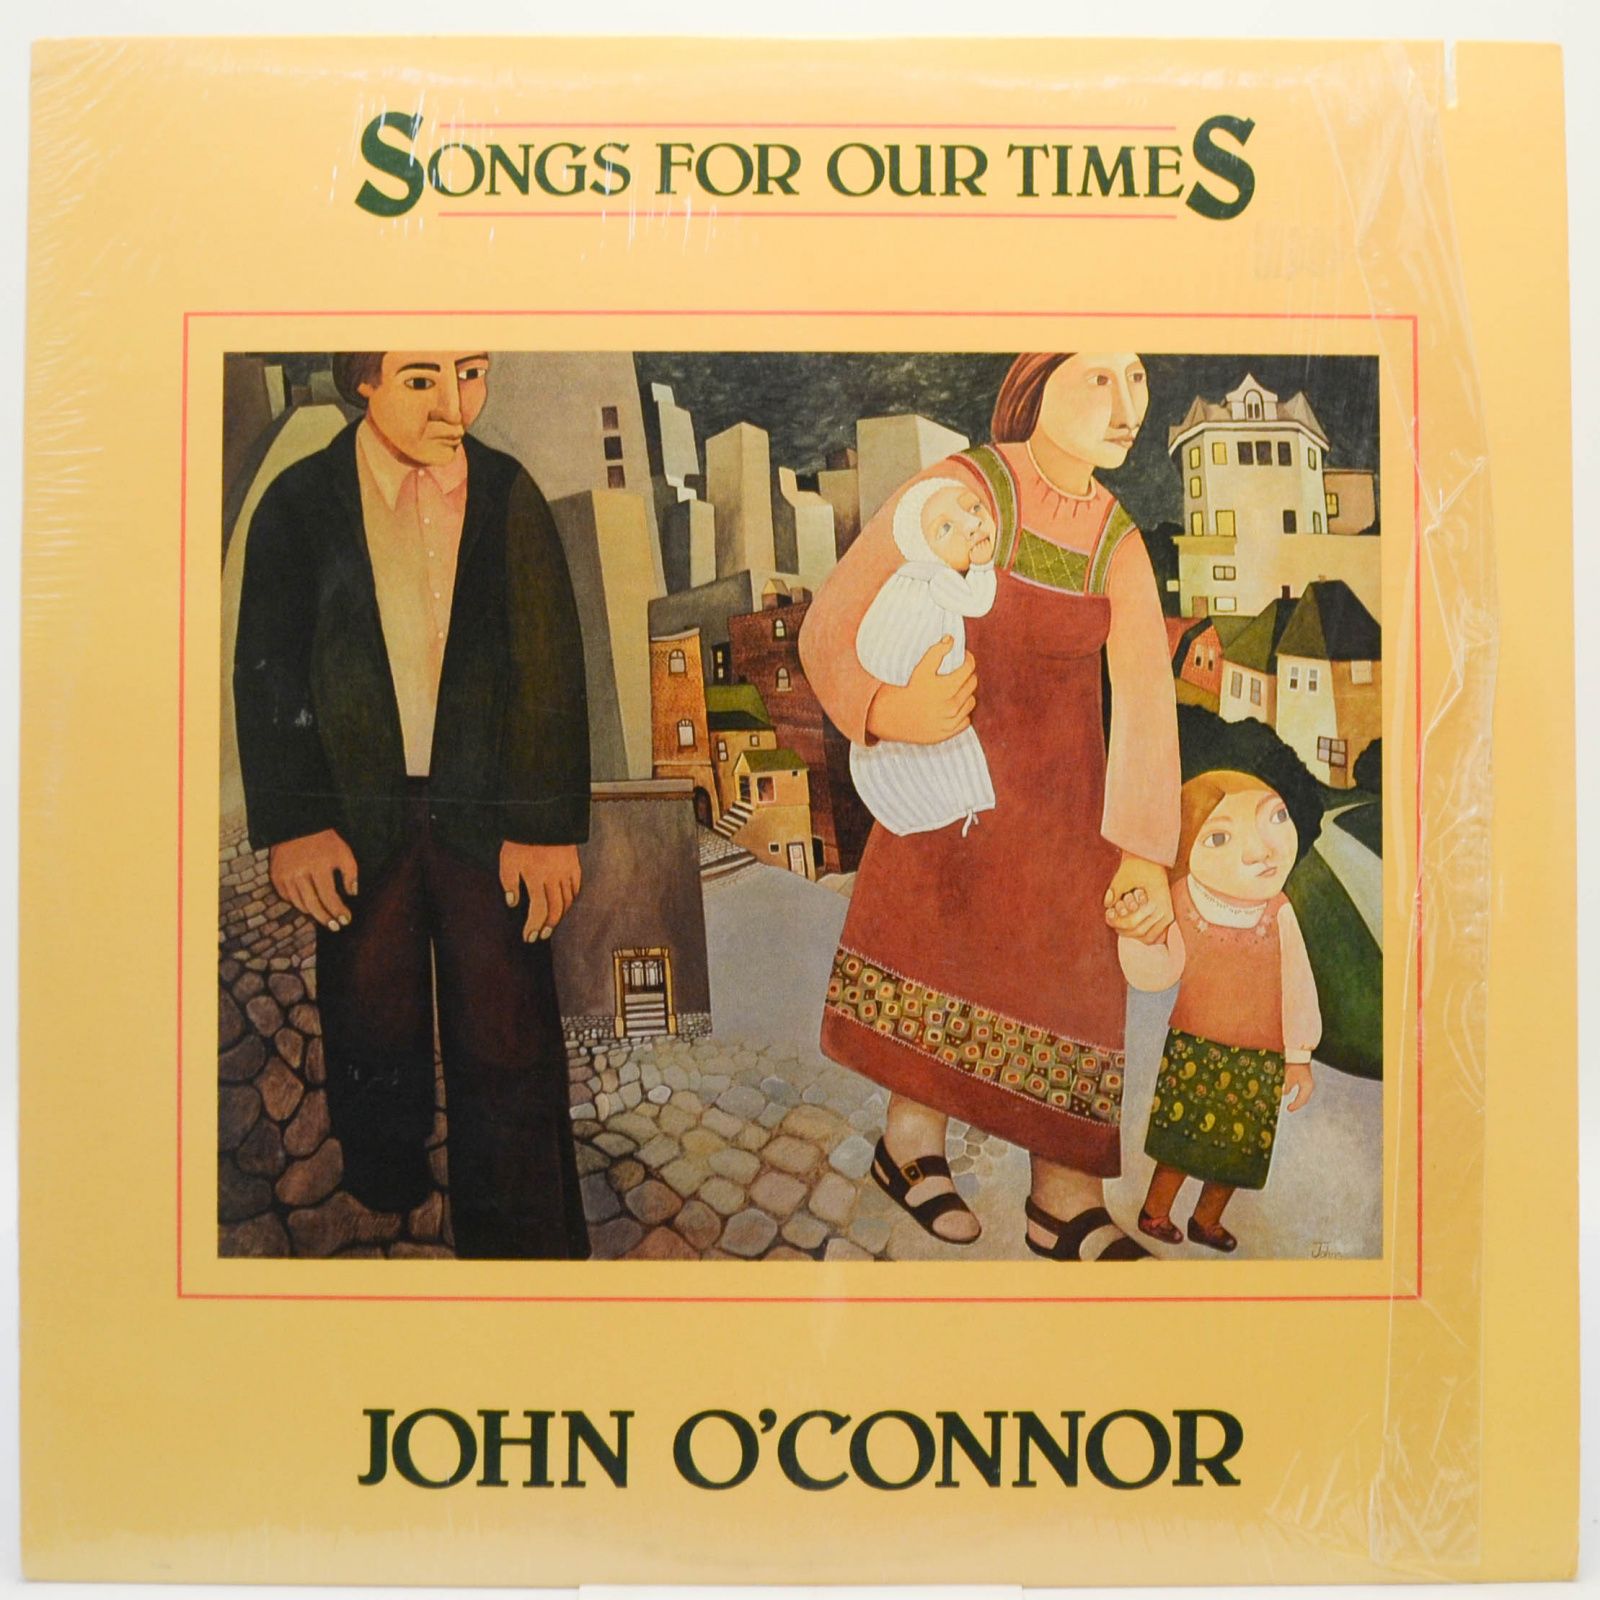 John O'Connor — Songs For Our Times, 1984